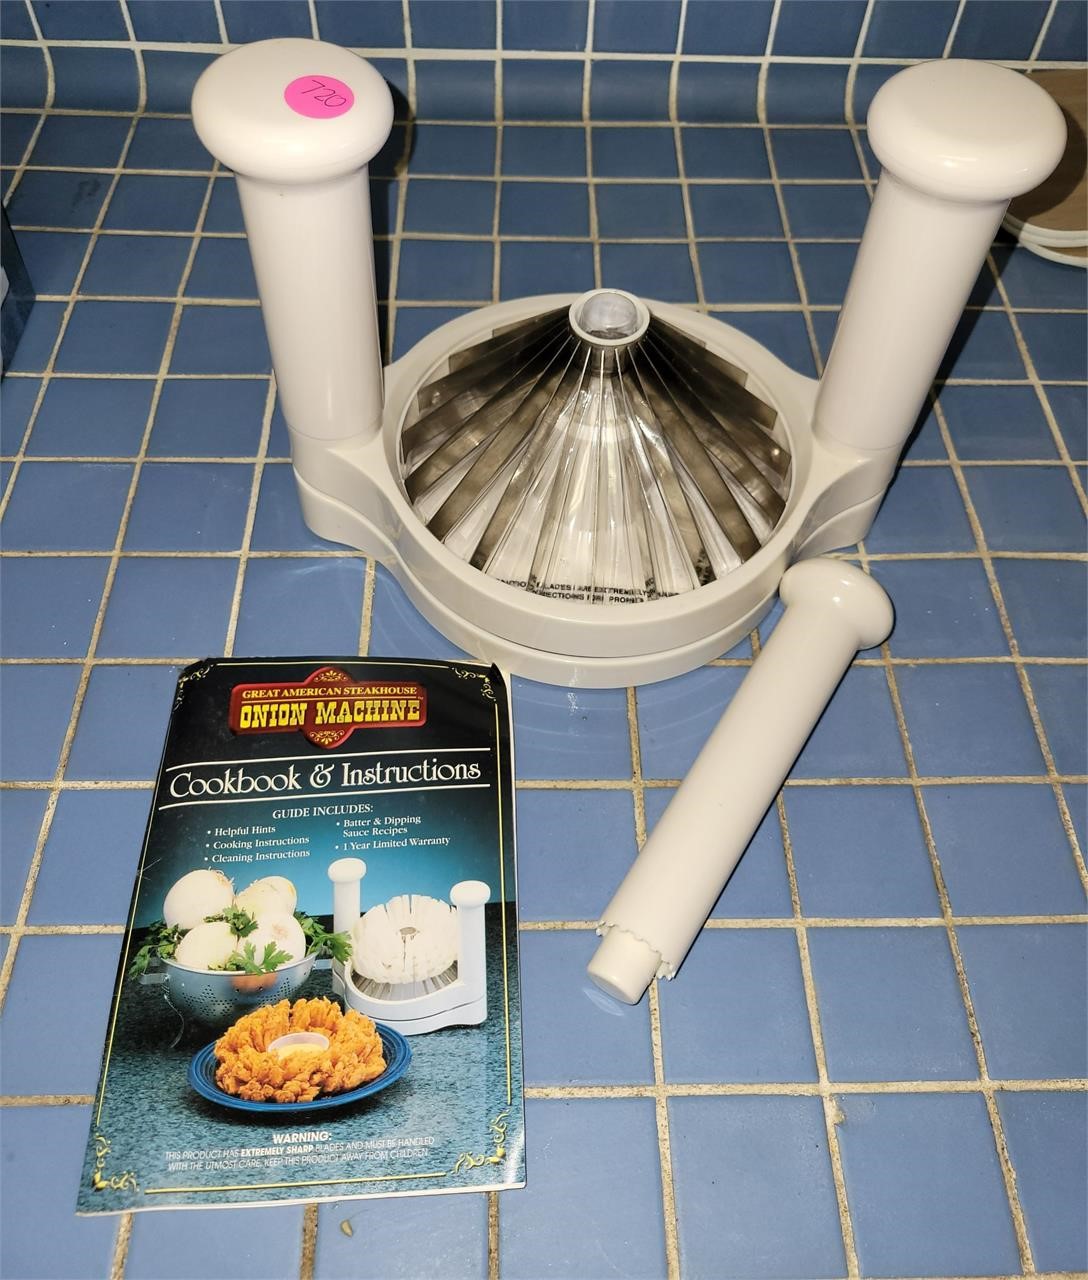 Blooming Onion Maker Never Used